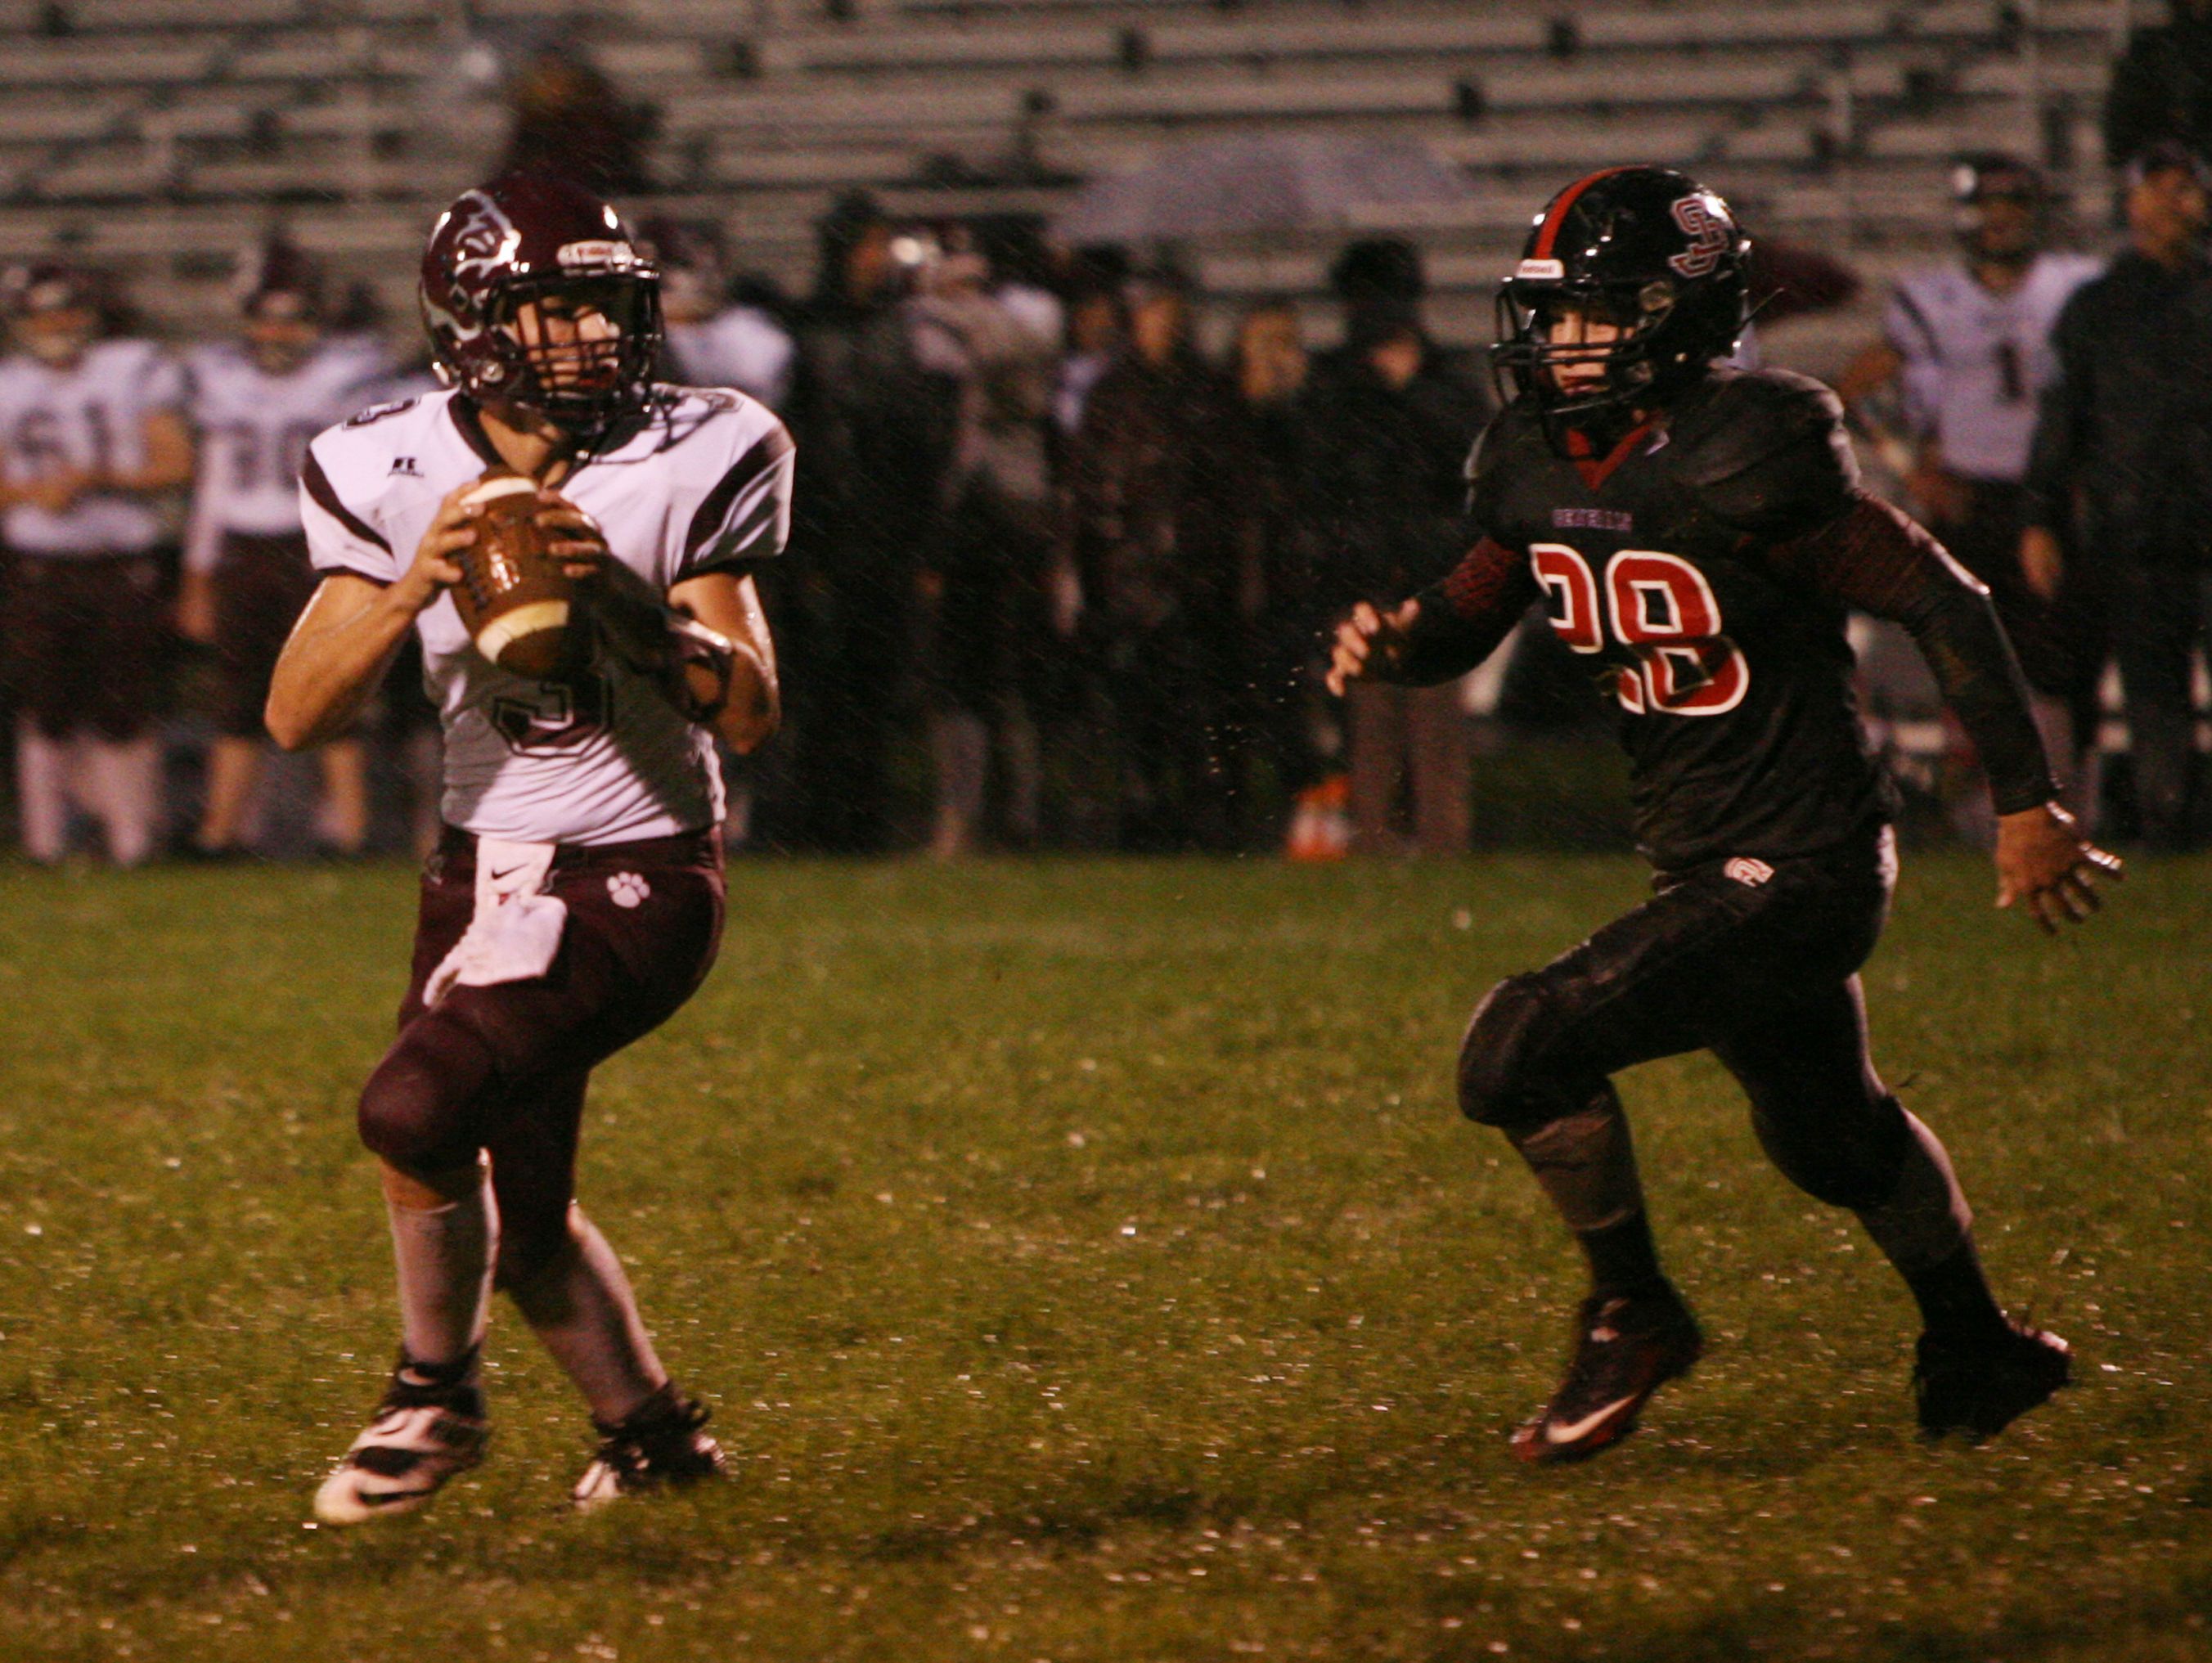 Stonewall Jackson's Dylan Vann goes after Stuarts Draft quarterback Garrett Campbell during the first half of Friday night's game against Stonewall Jackson in Quicksburg on Sept. 30, 2016.